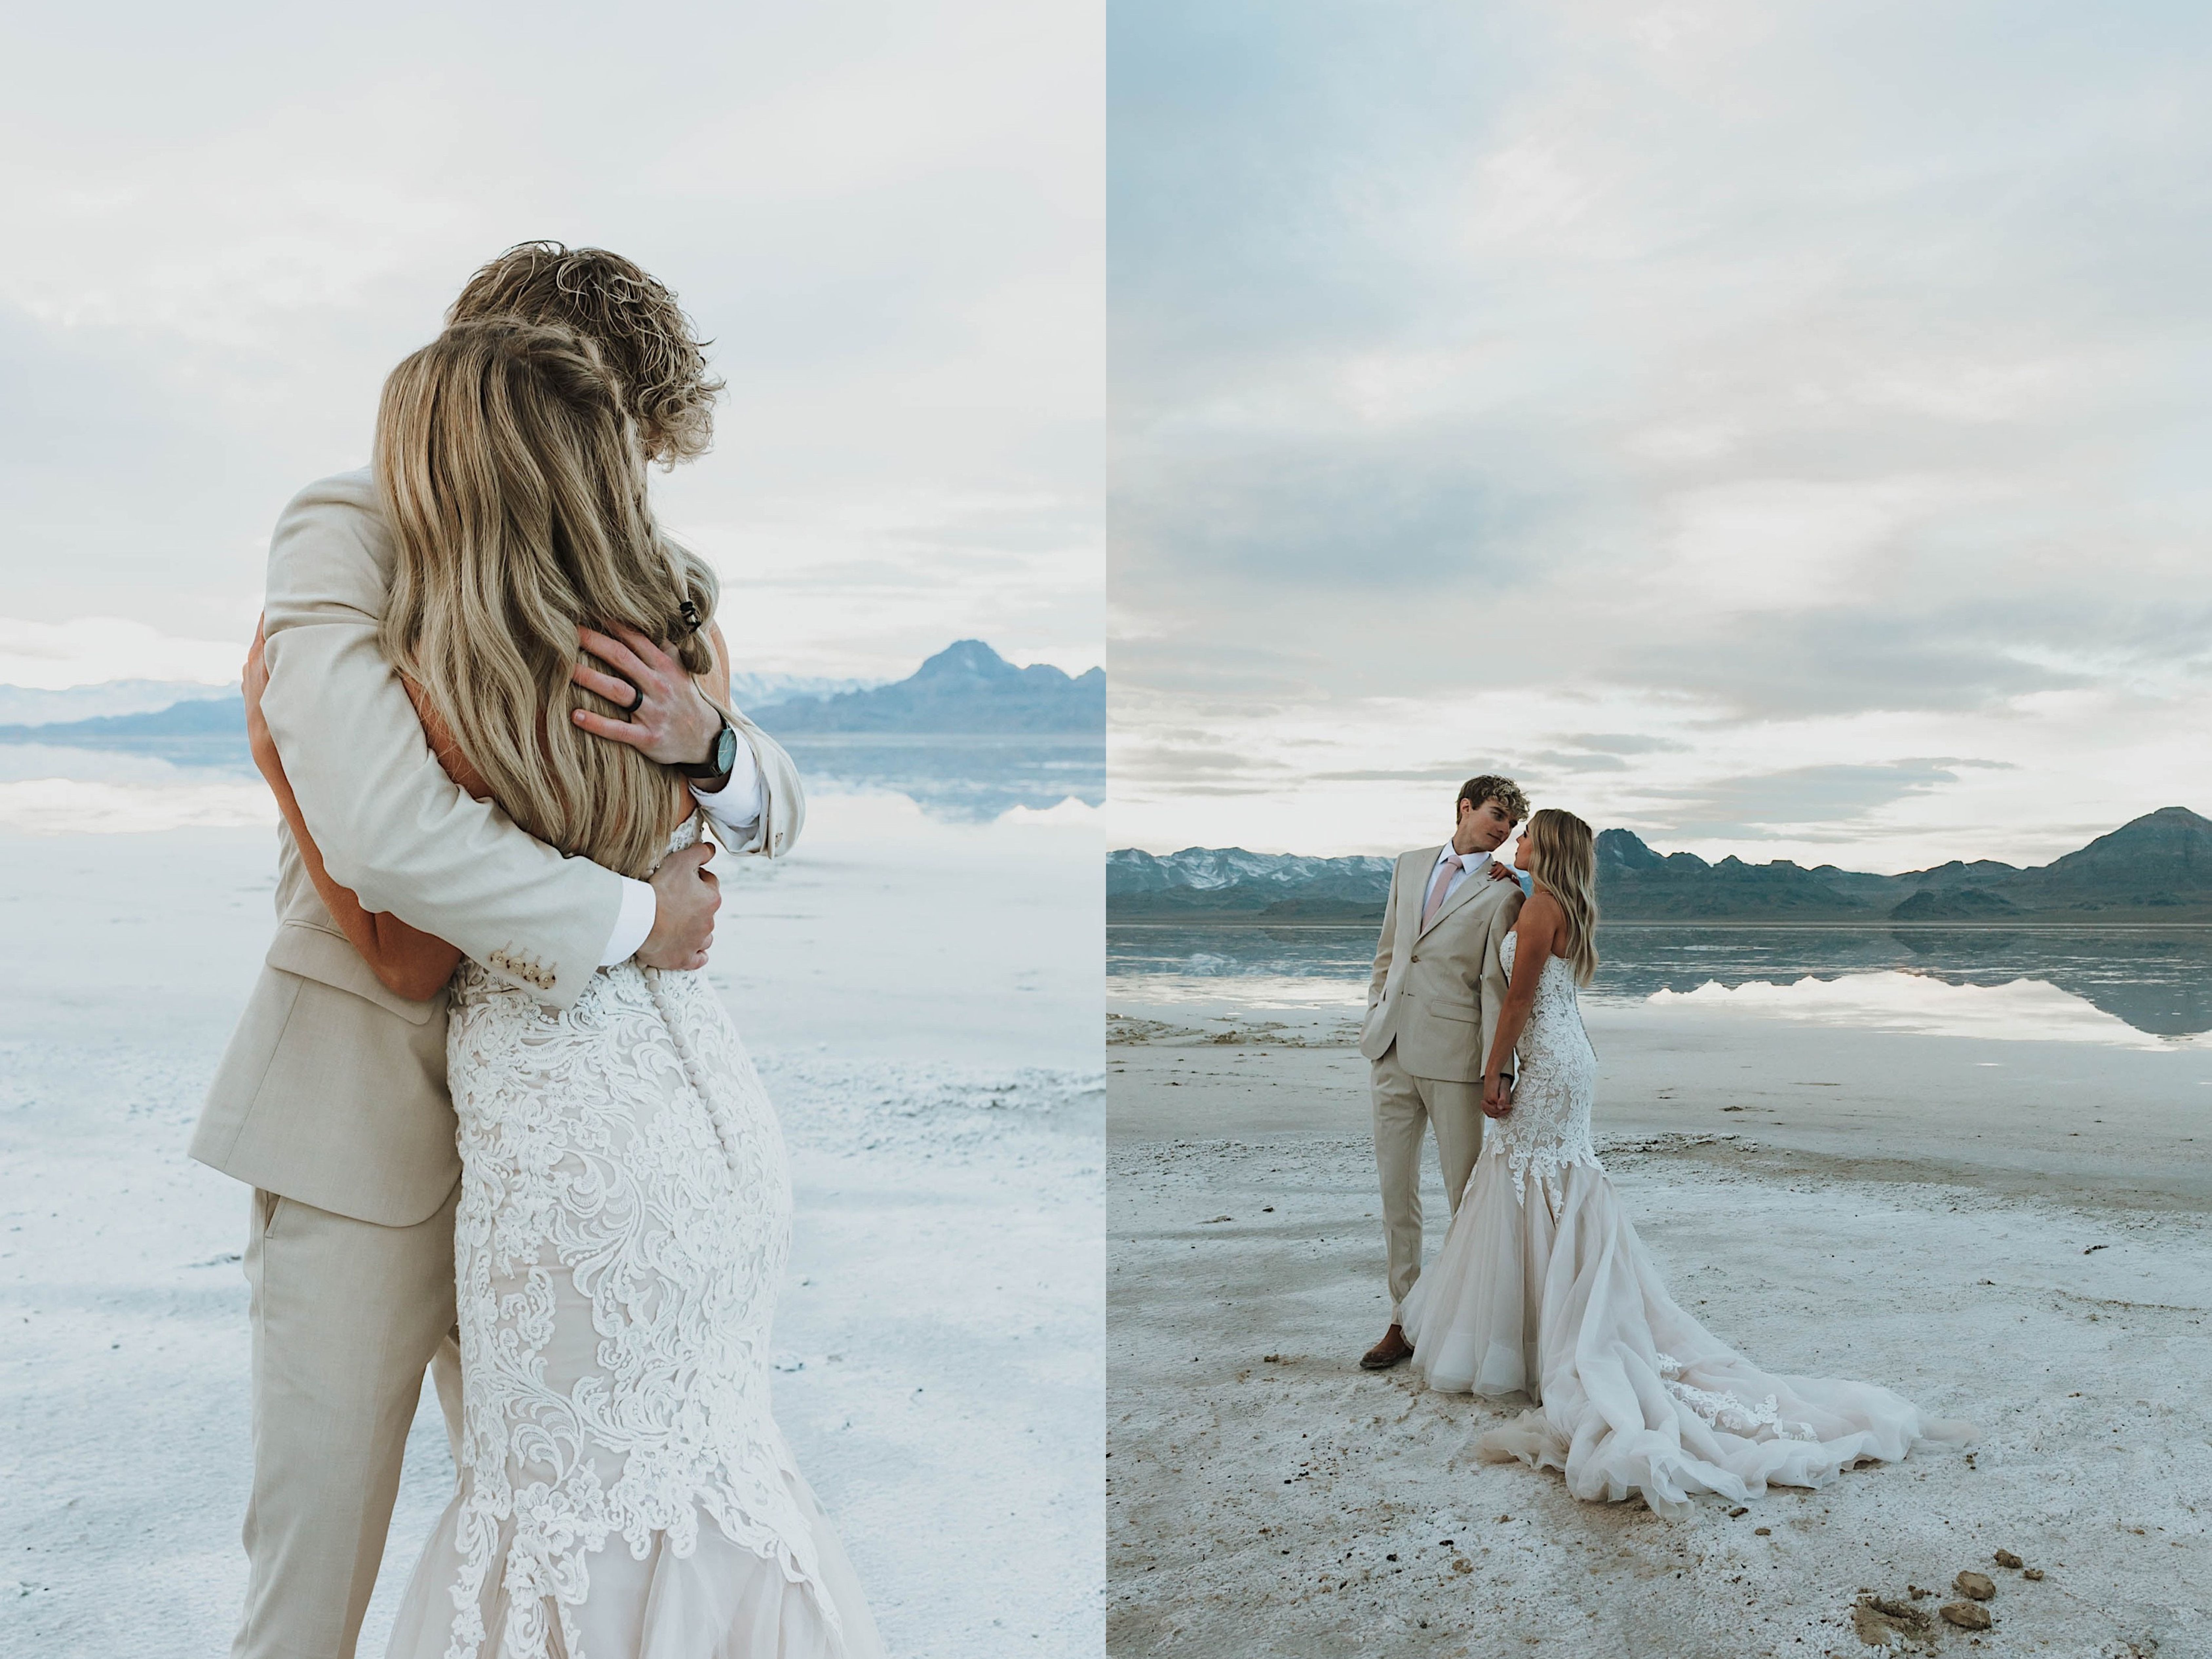 2 photos side by side of a bride and groom in the Utah Salt Flats, the left is of them hugging one another and the right is of them holding hands while looking at one another